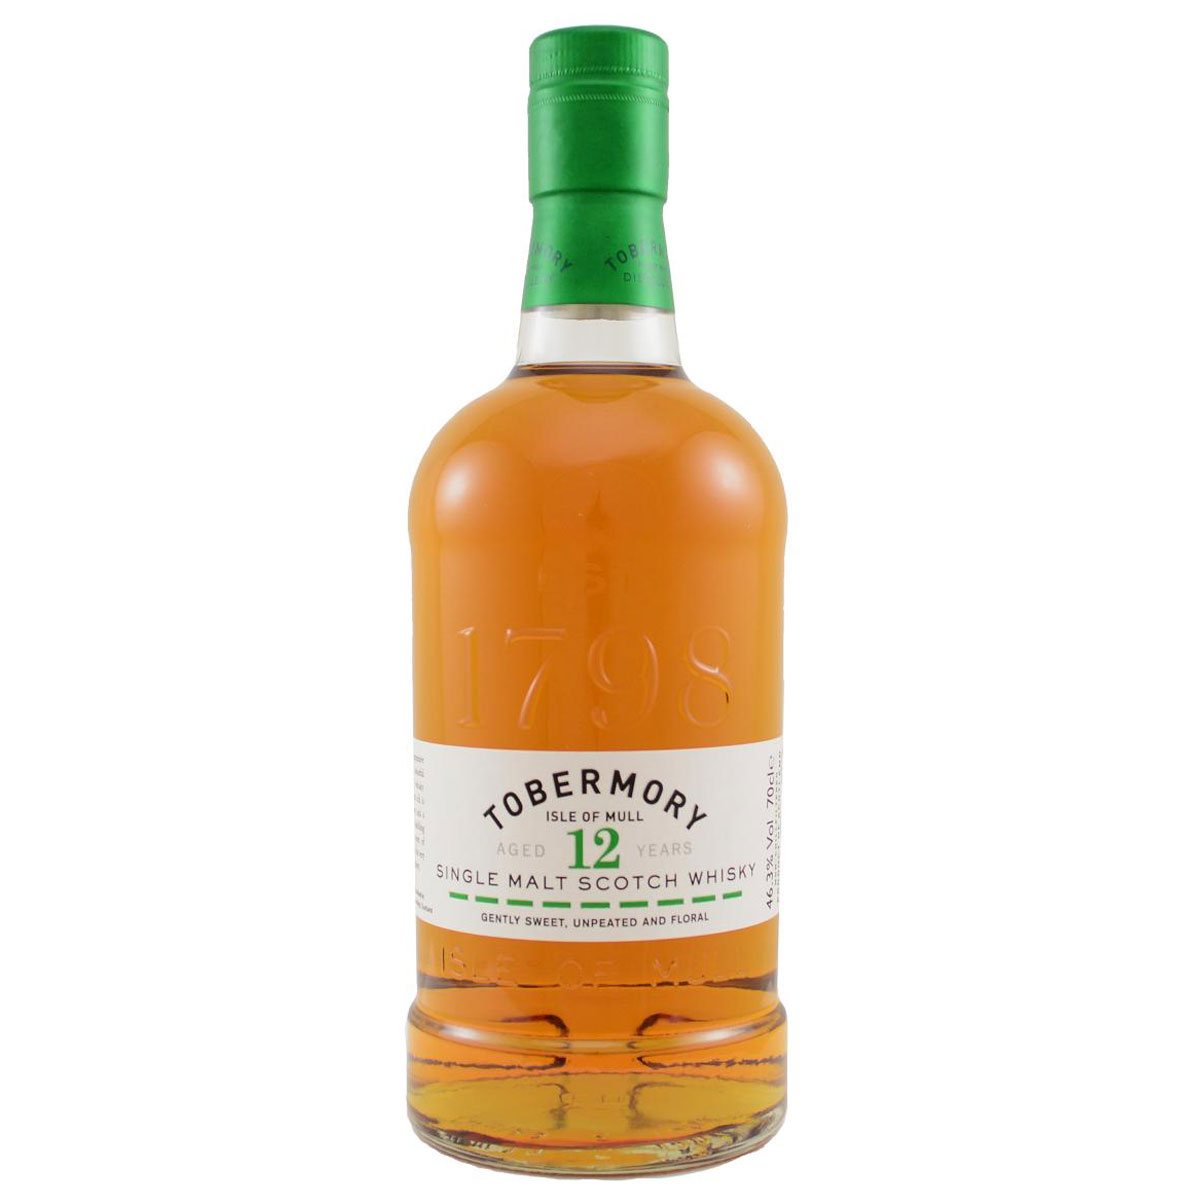 a bottle of tobermory 12 years old